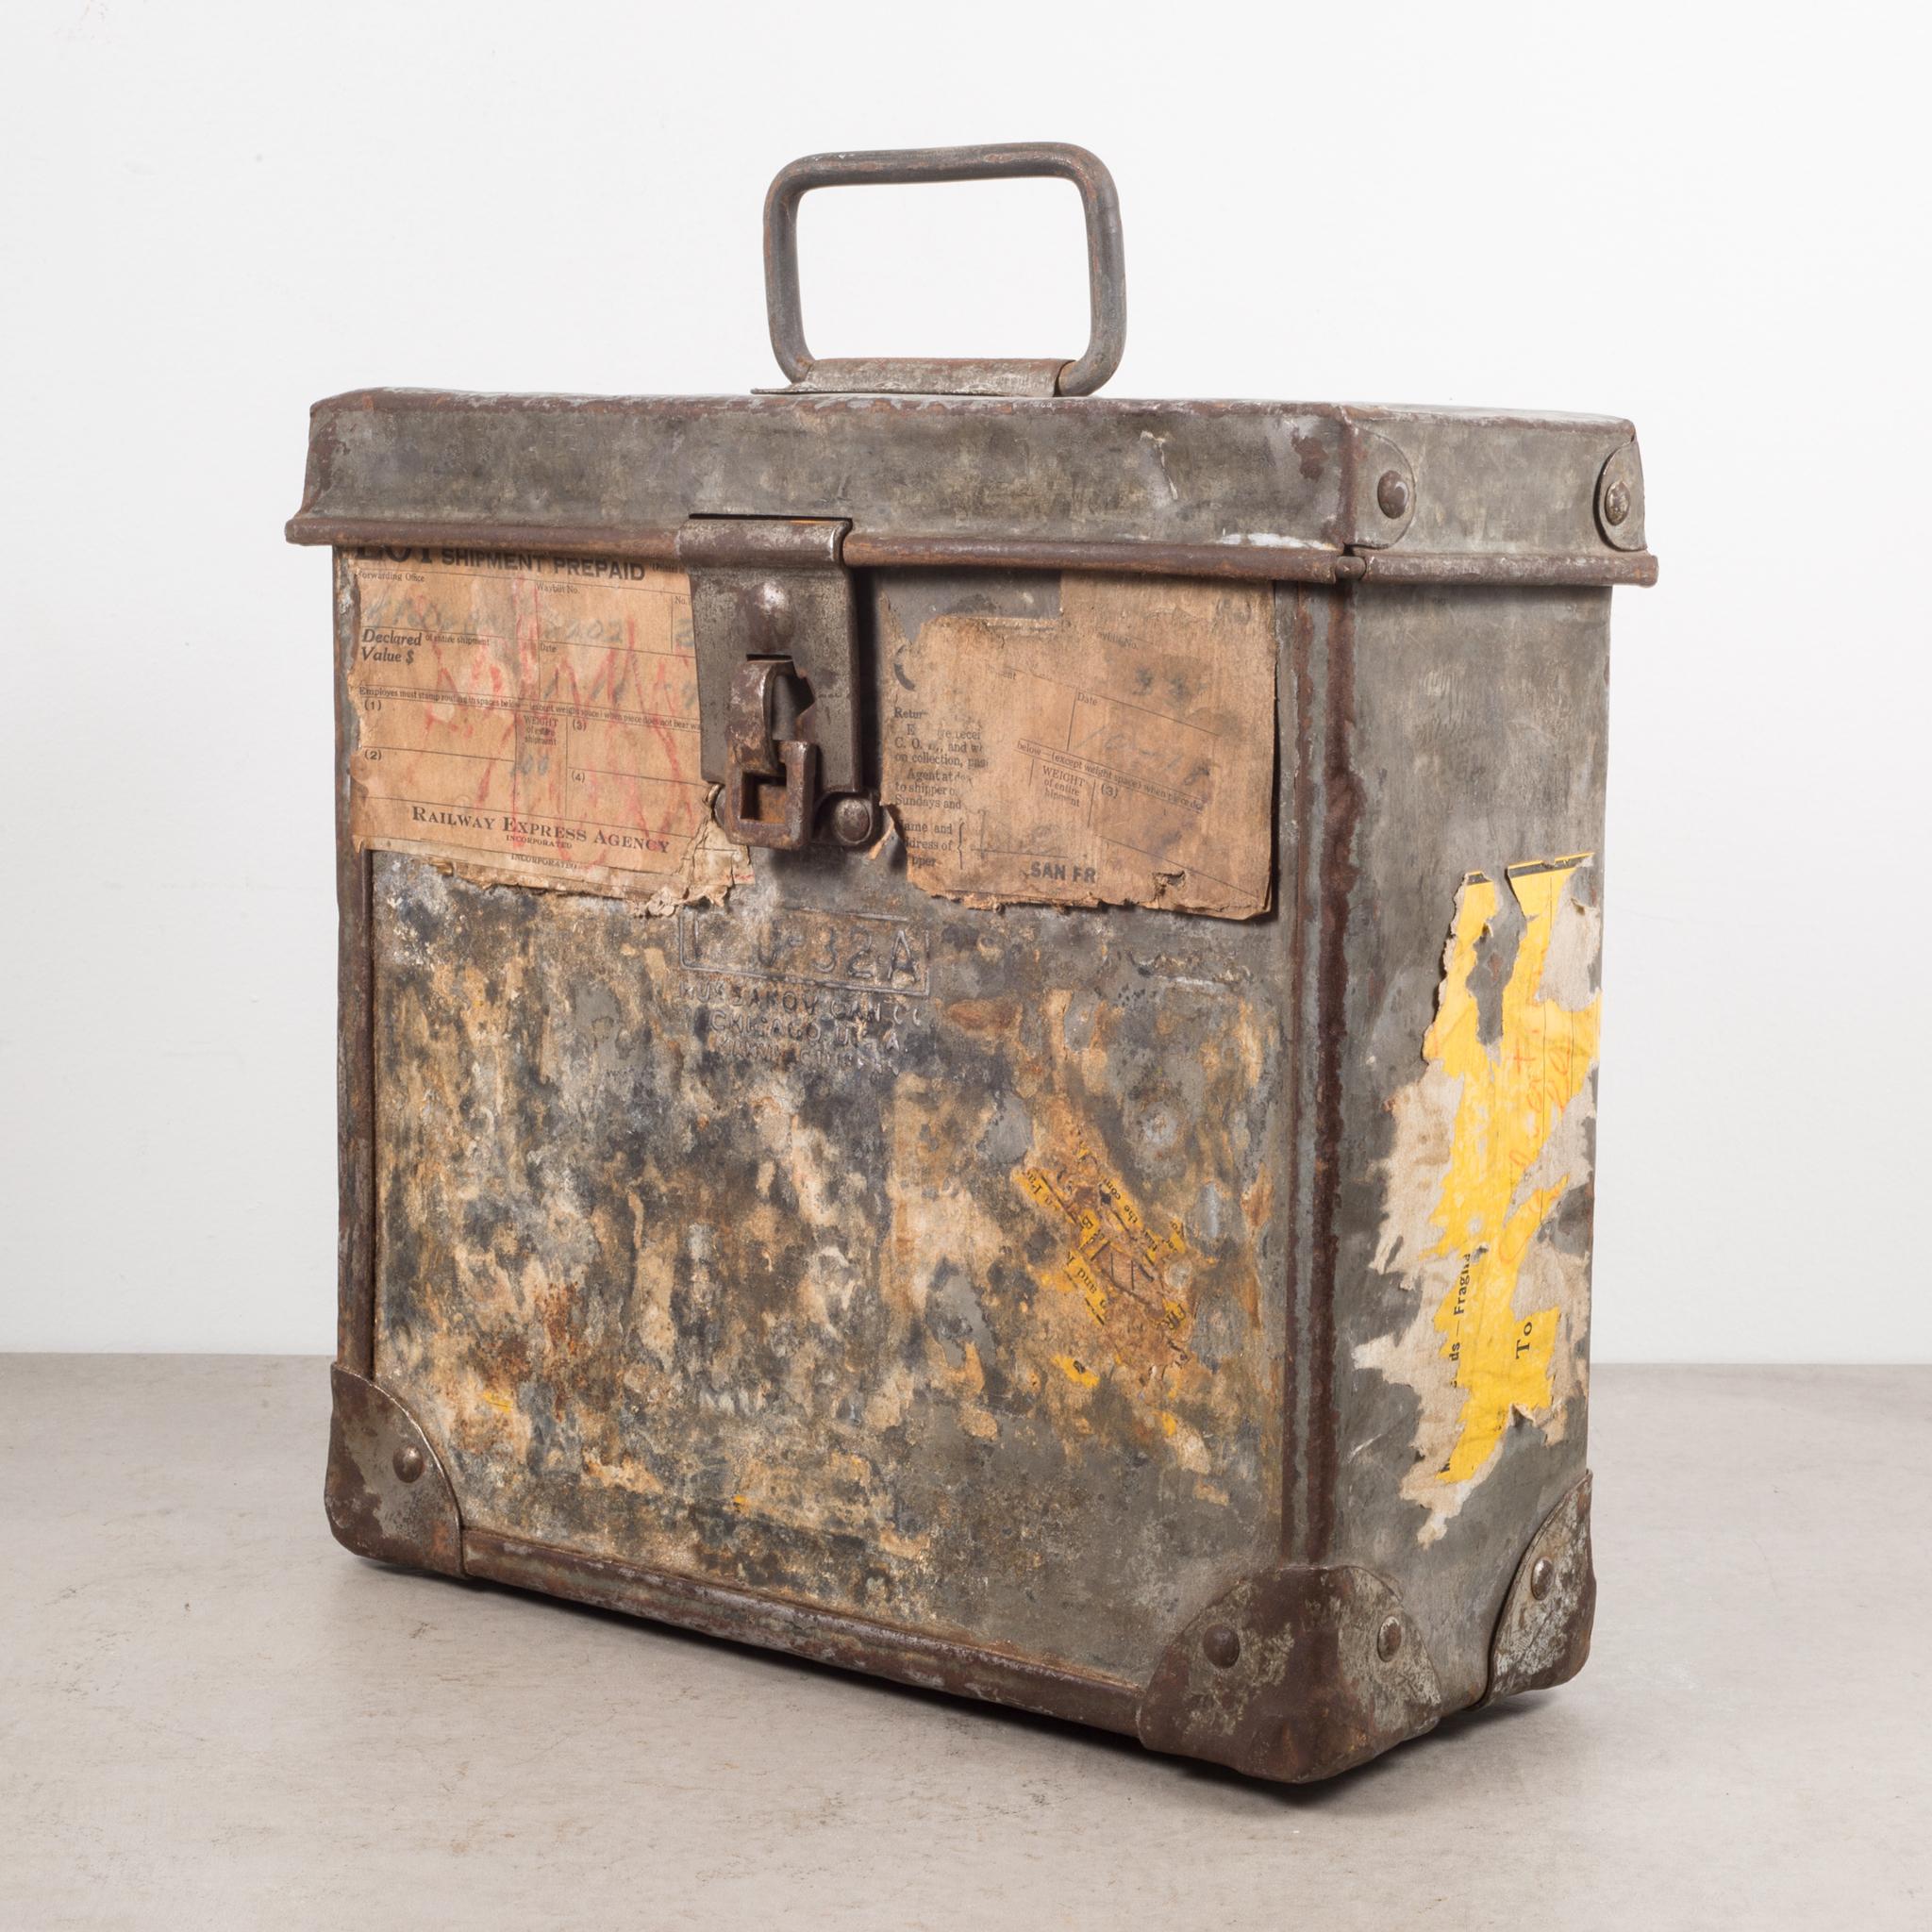 About:

An antique galvanized steel shipping strongbox with crisscross lock, handle, heavy reinforced corners and several original dated shipping labels.

Creator: Railway Express Agency Inc.
Date of manufacture: circa 1930s.
Materials and